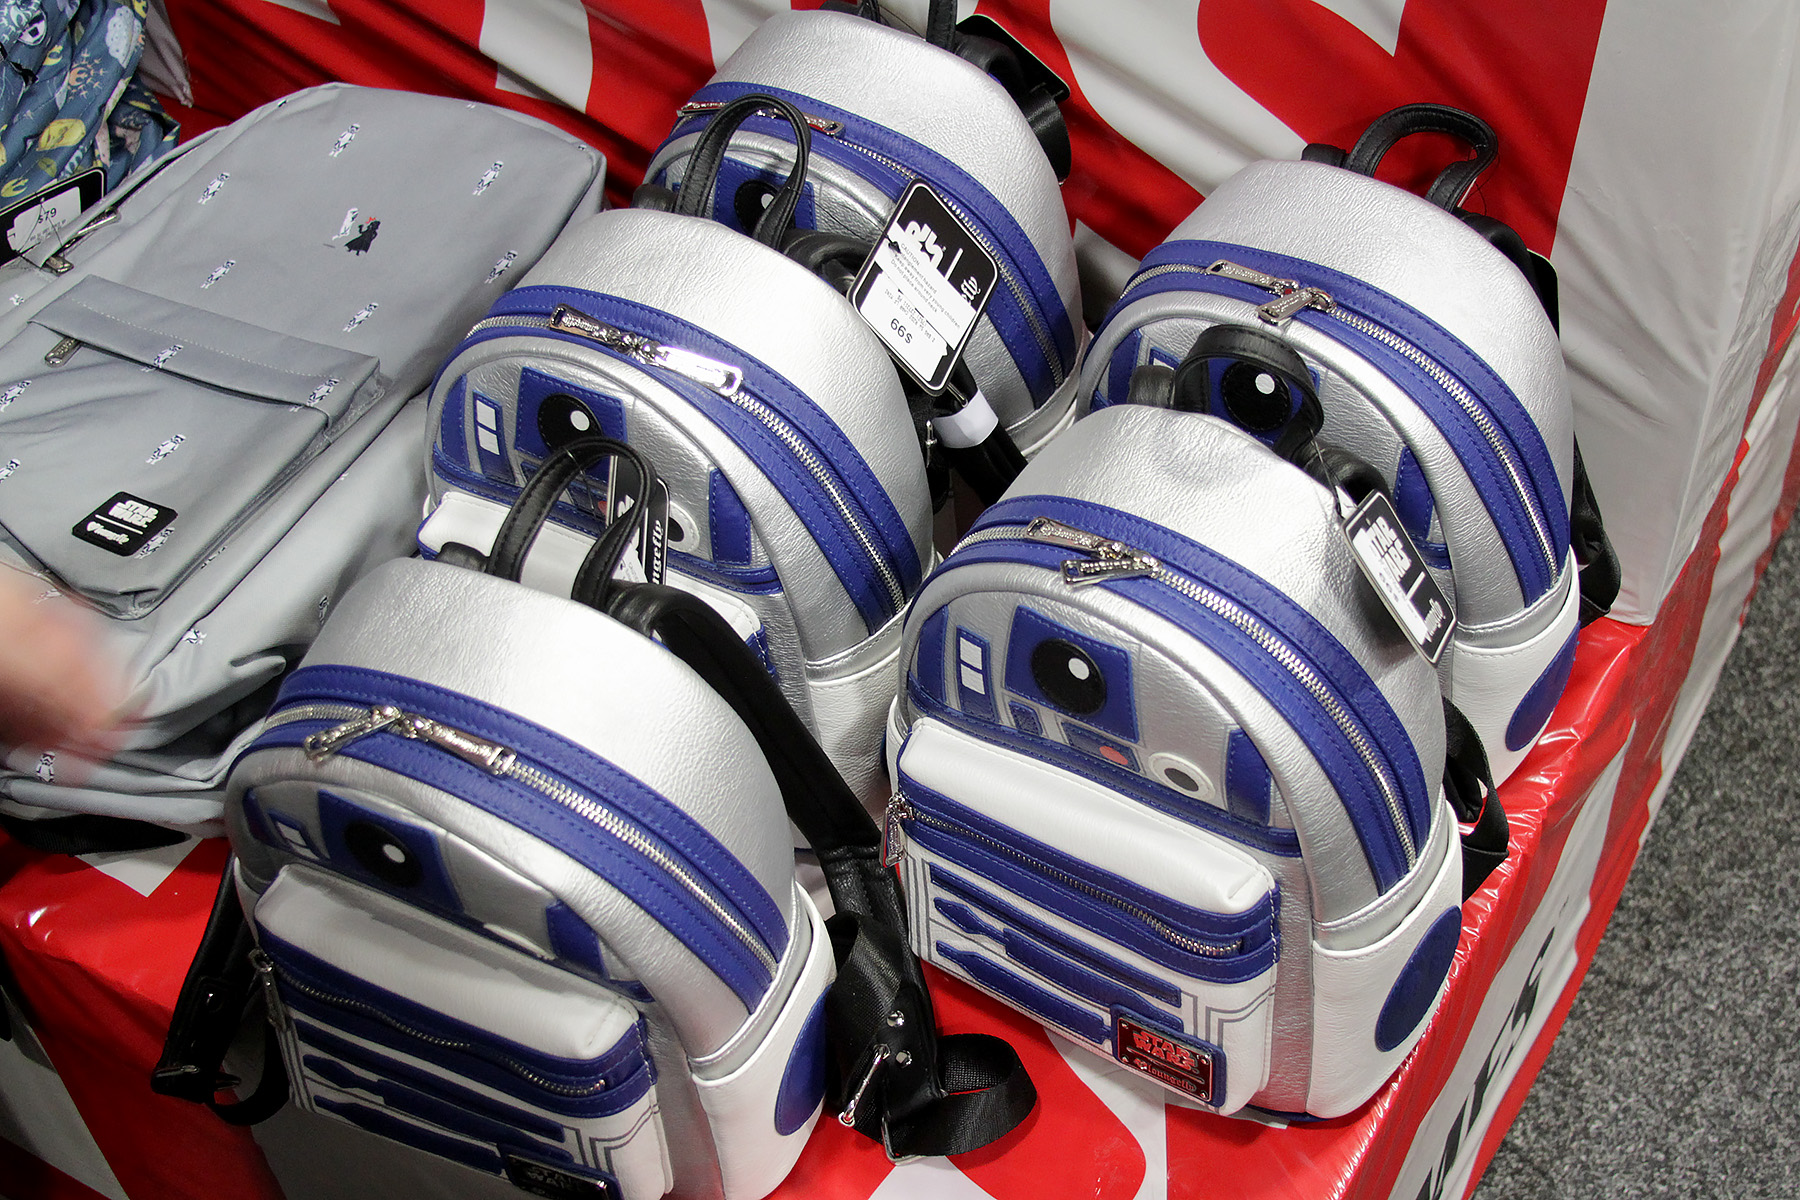 Loungefly x Star Wars Bags and Wallets at the EB Games booth at Armageddon Expo Auckland 2018